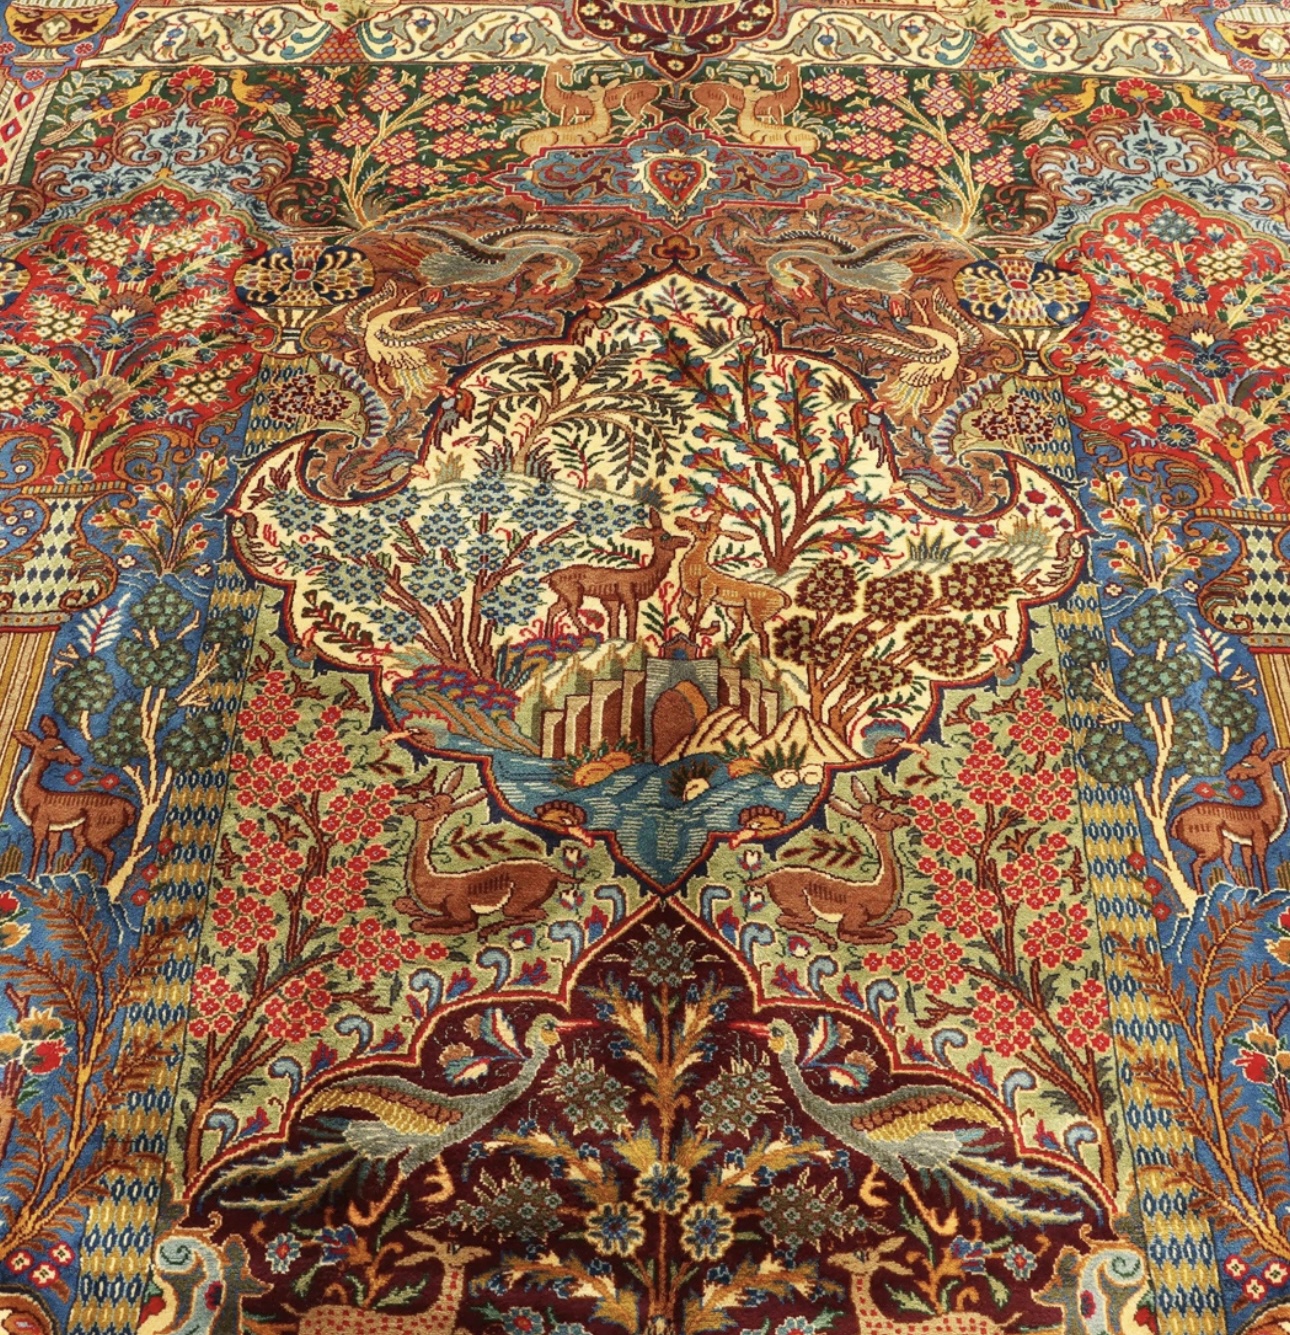 A cozy living room with a Persian rug adorning the hardwood floor. The rug's soft, plush fibers provide warmth and comfort underfoot, creating an inviting and relaxing space. A family gathers on the sofa, enjoying moments of togetherness while experiencing the tactile delight of the rug's texture.